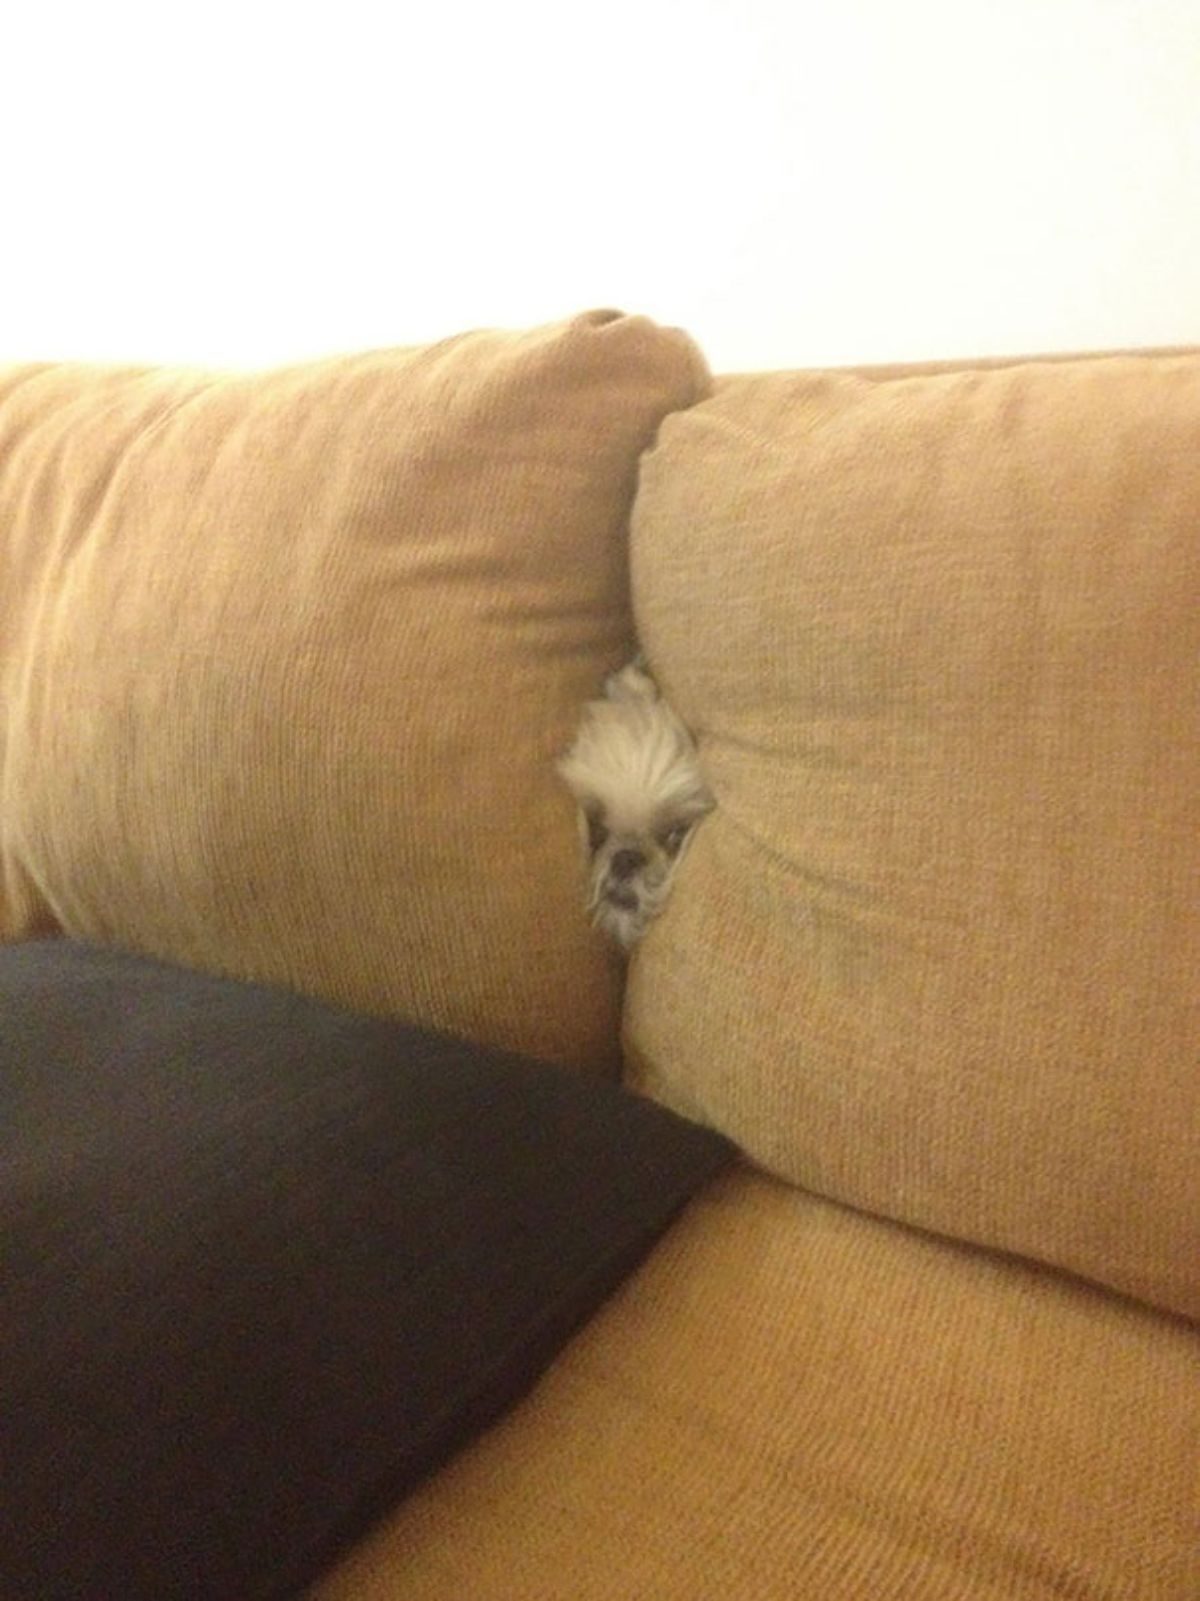 fluffy white dog face showing from between two brown couch cushions